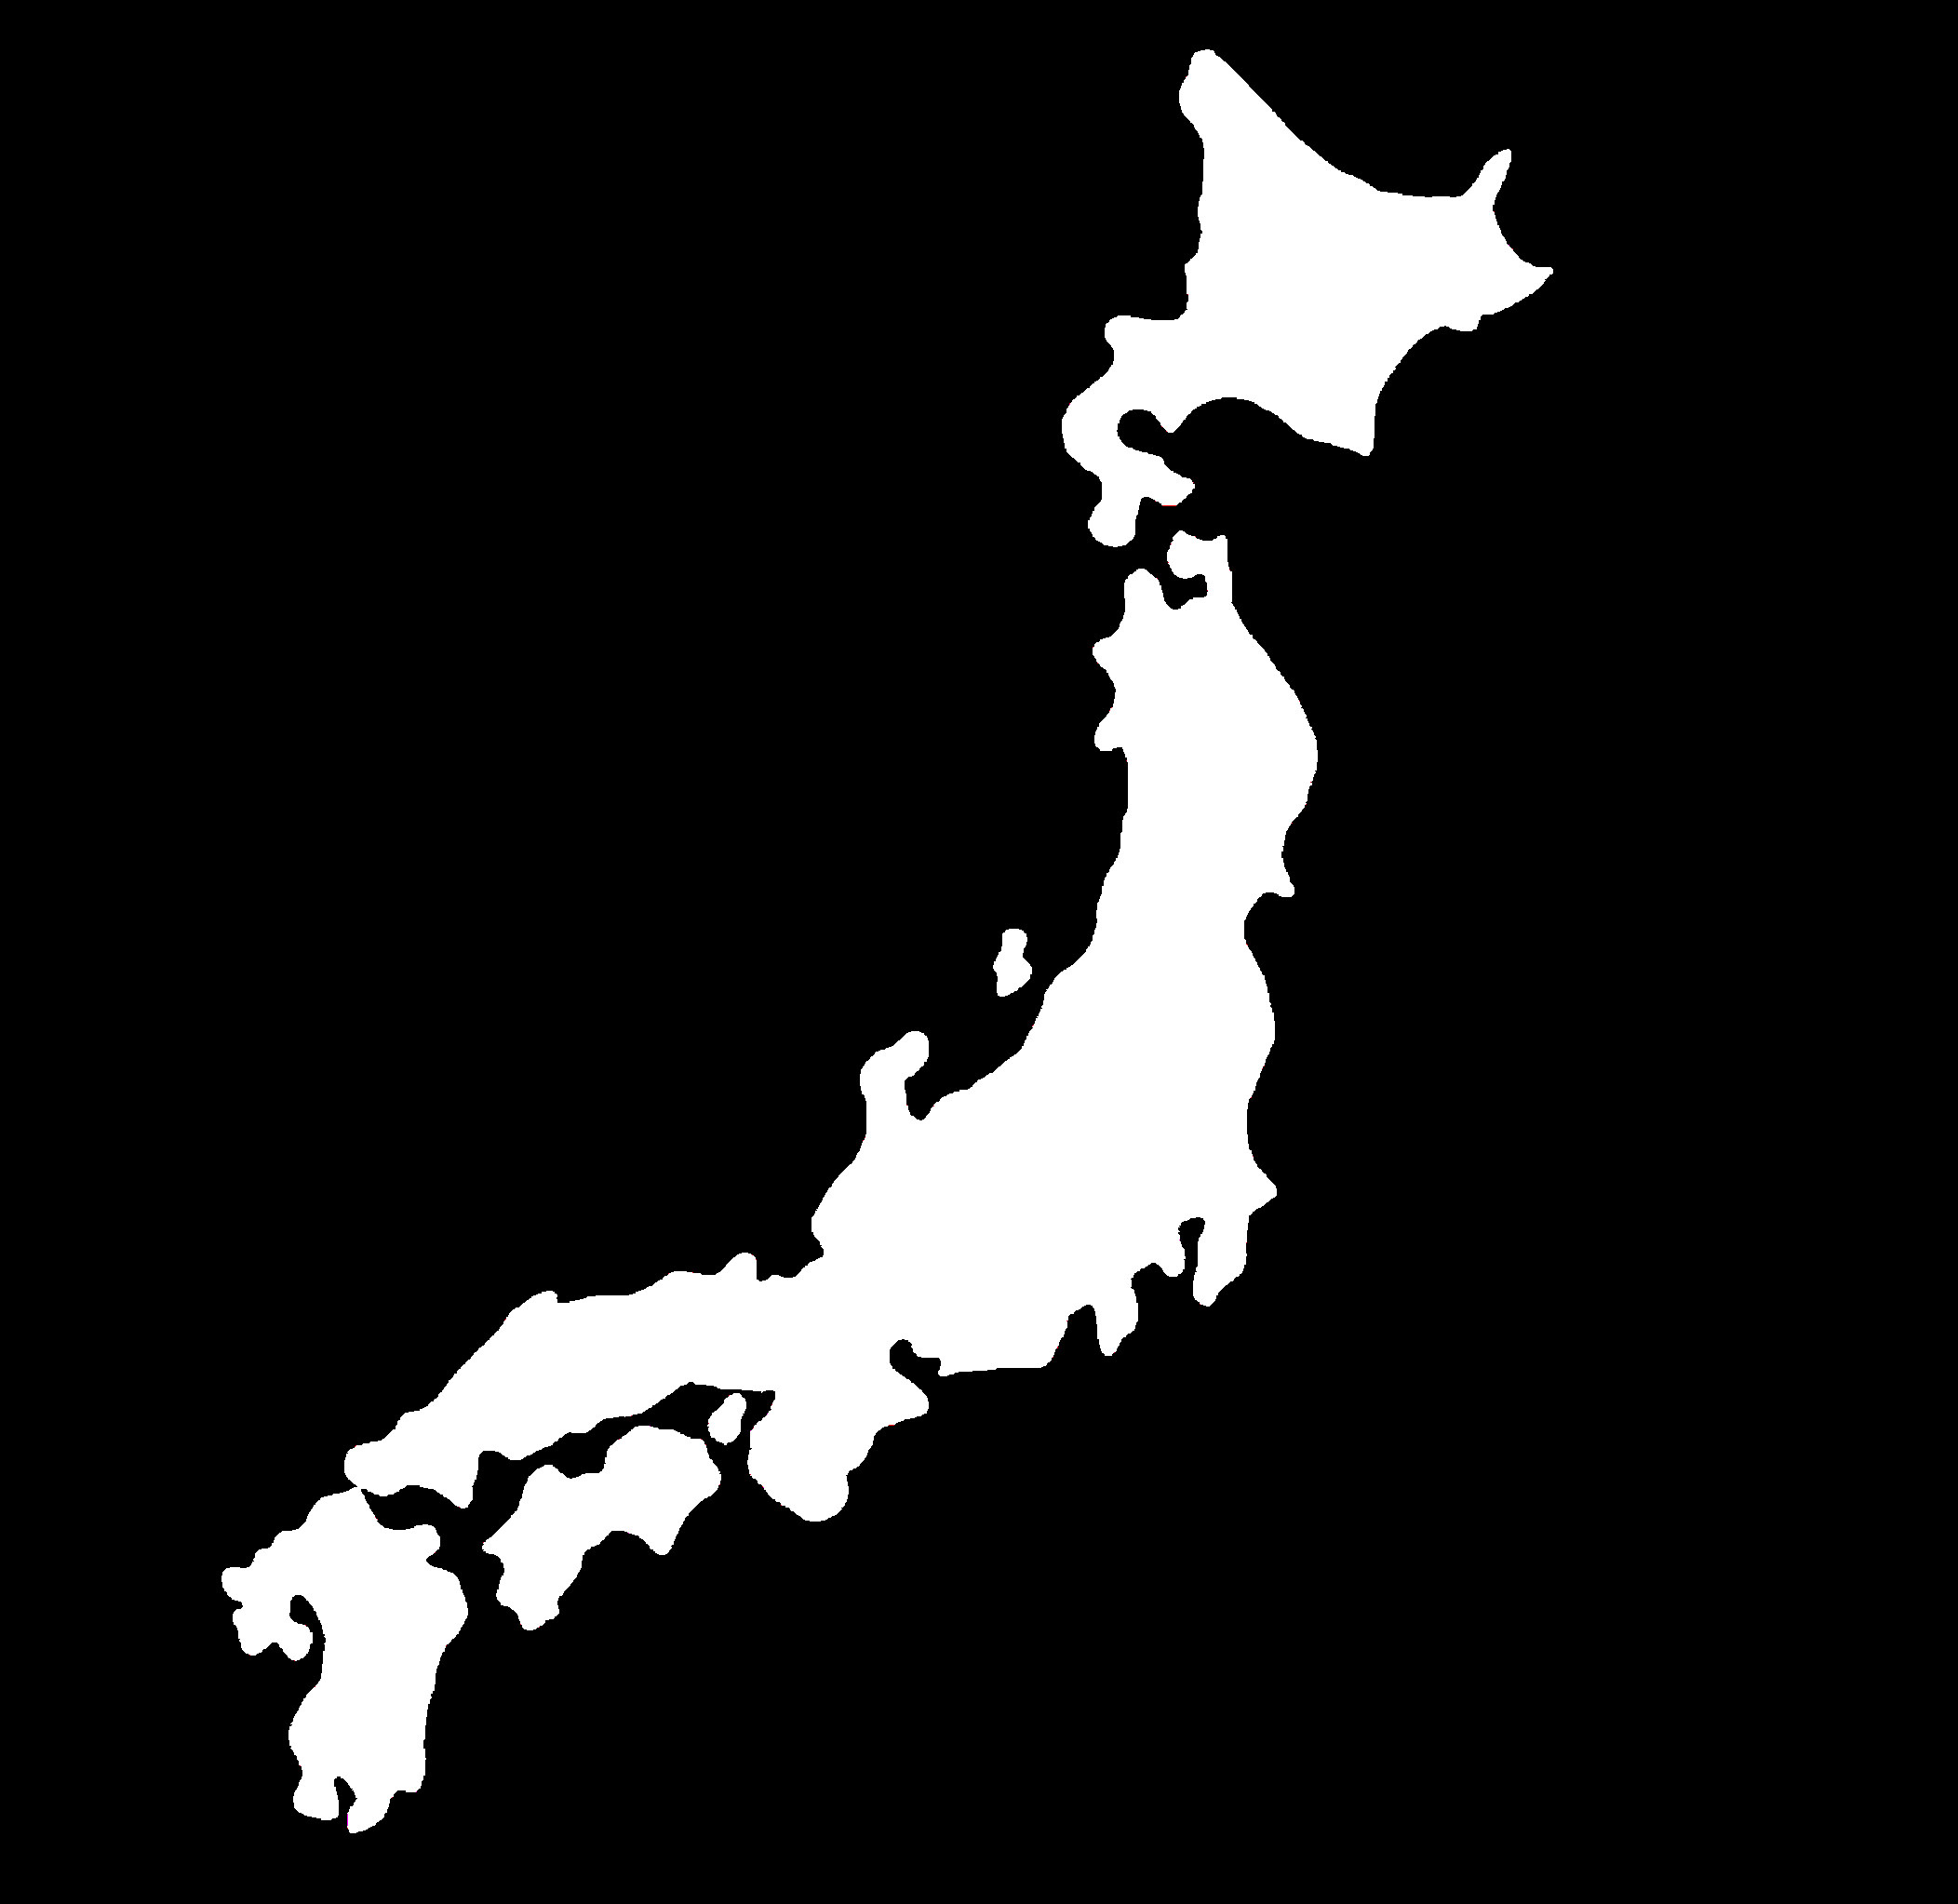 Map of Japan silhouette free download Japan map silhouette